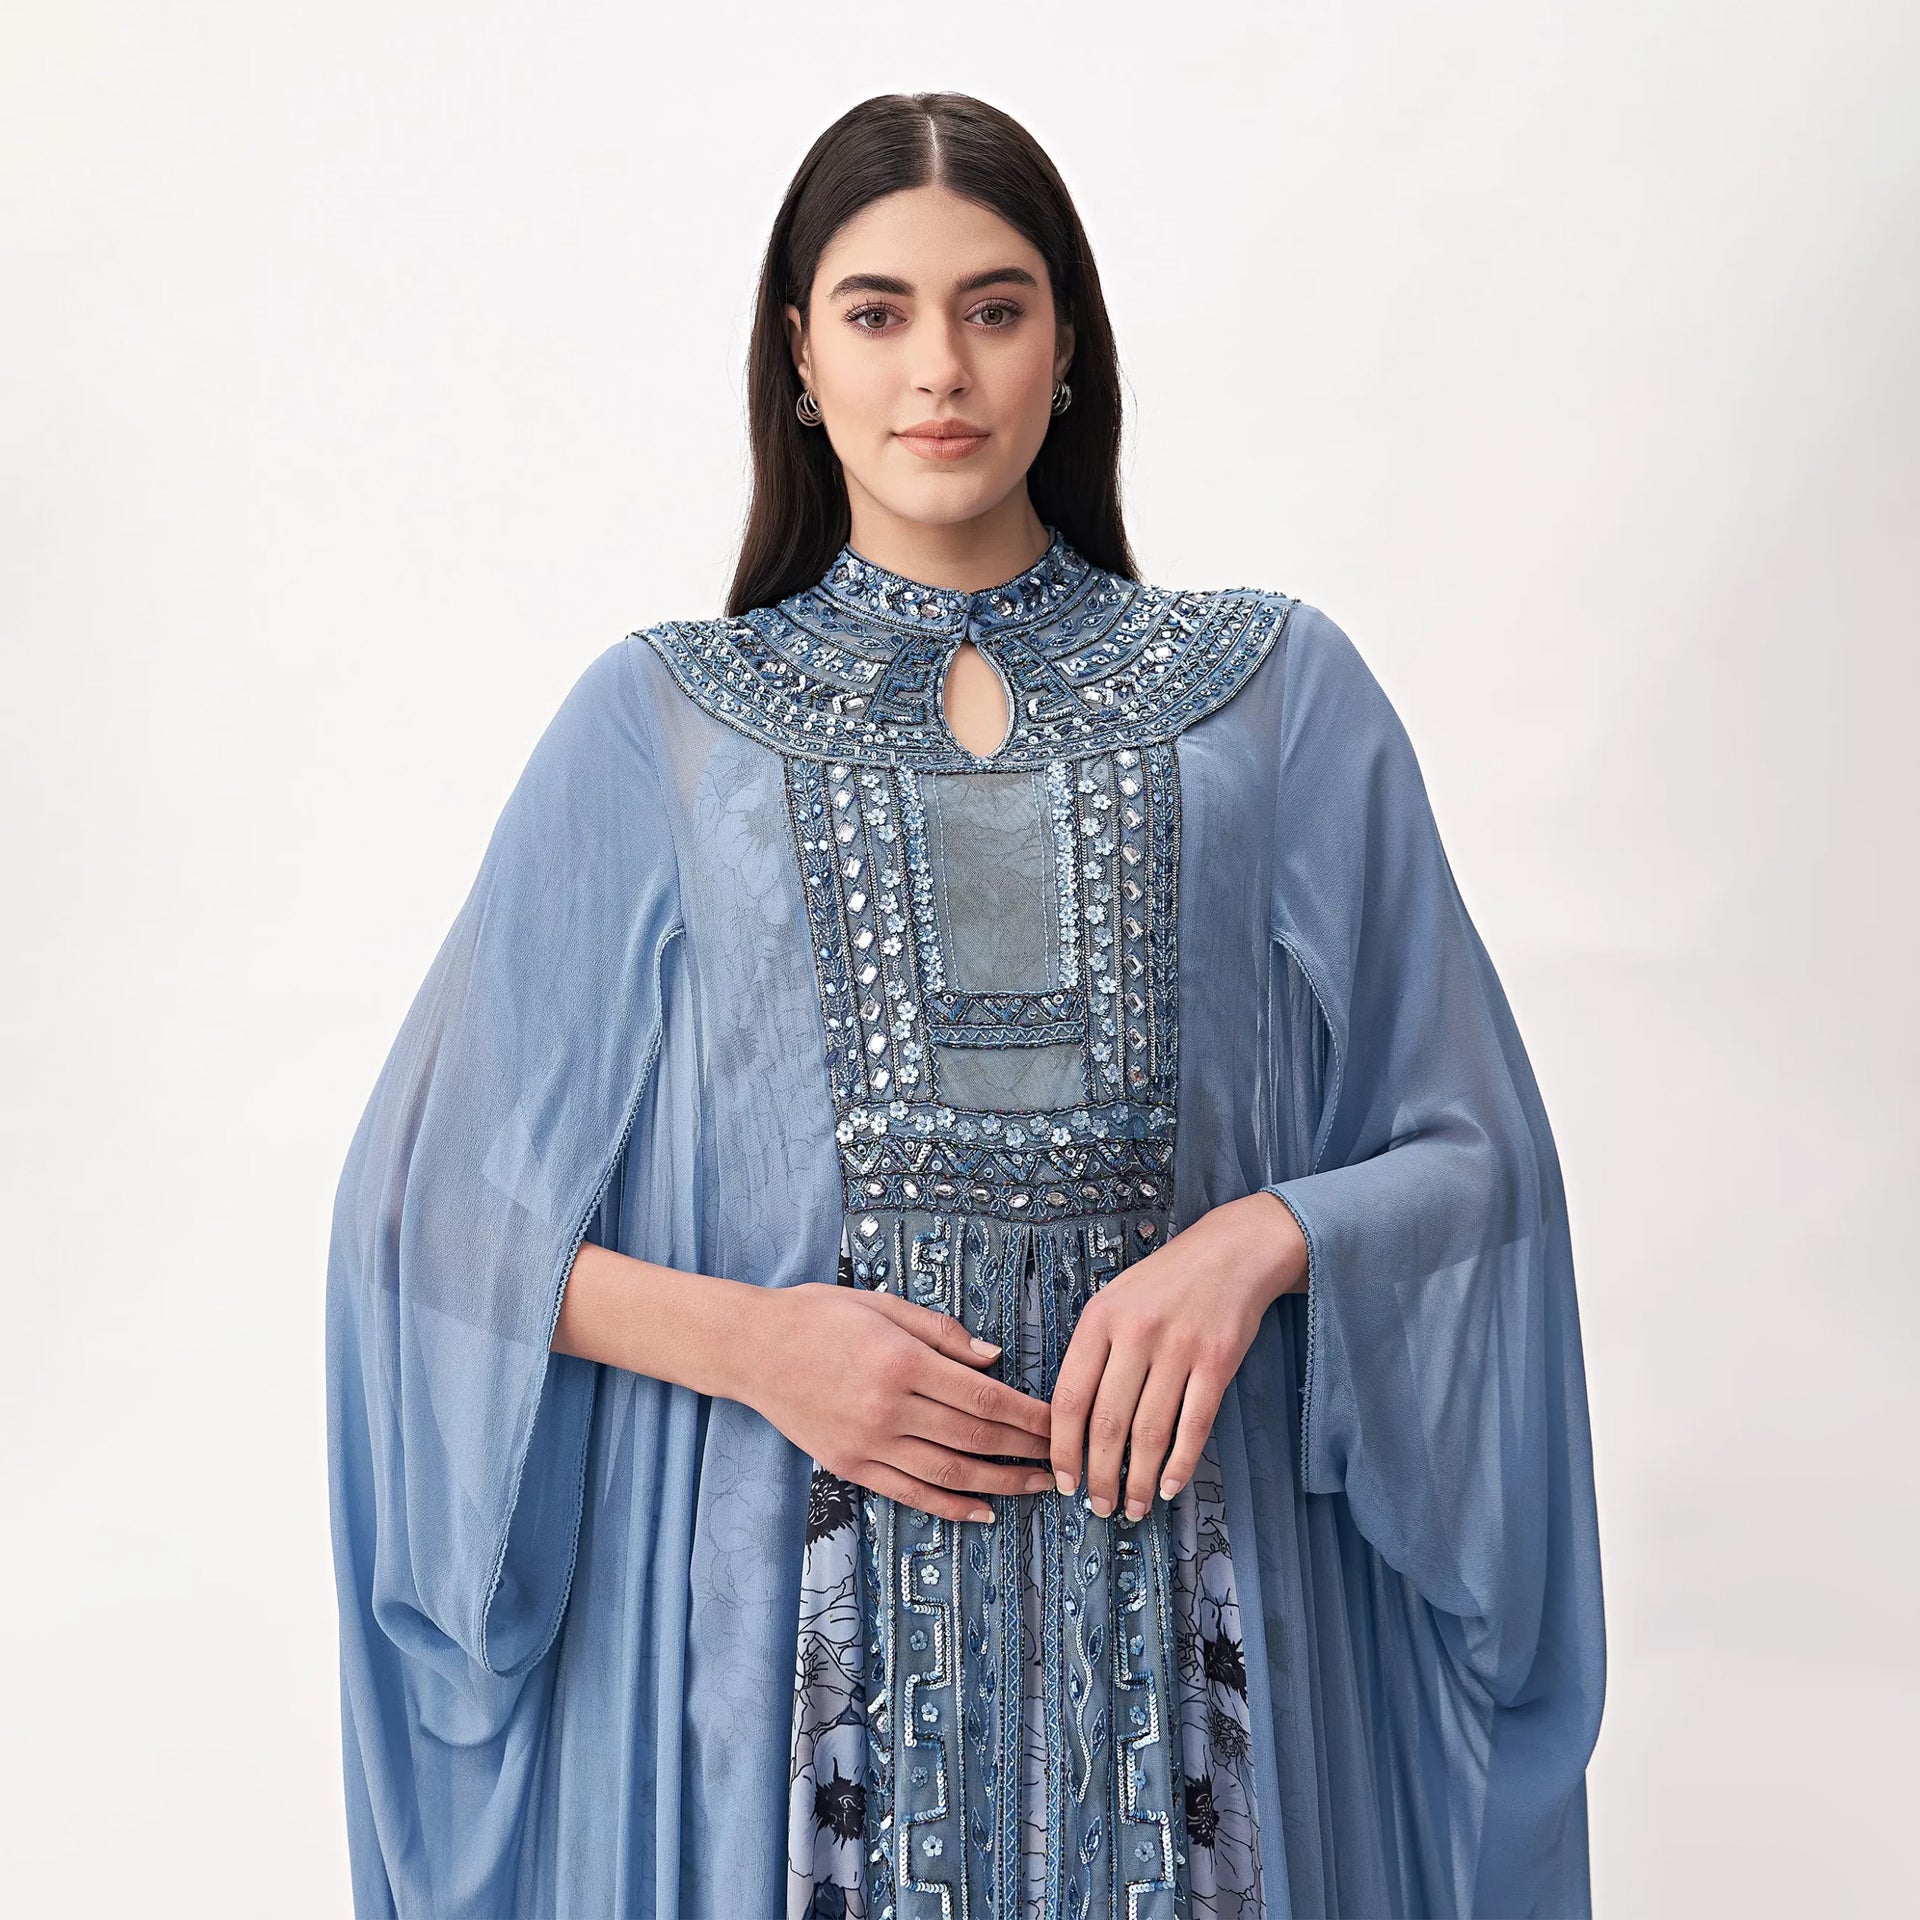 Light Blue Adele Dress with Silver Embroidery and Cape From Shalky